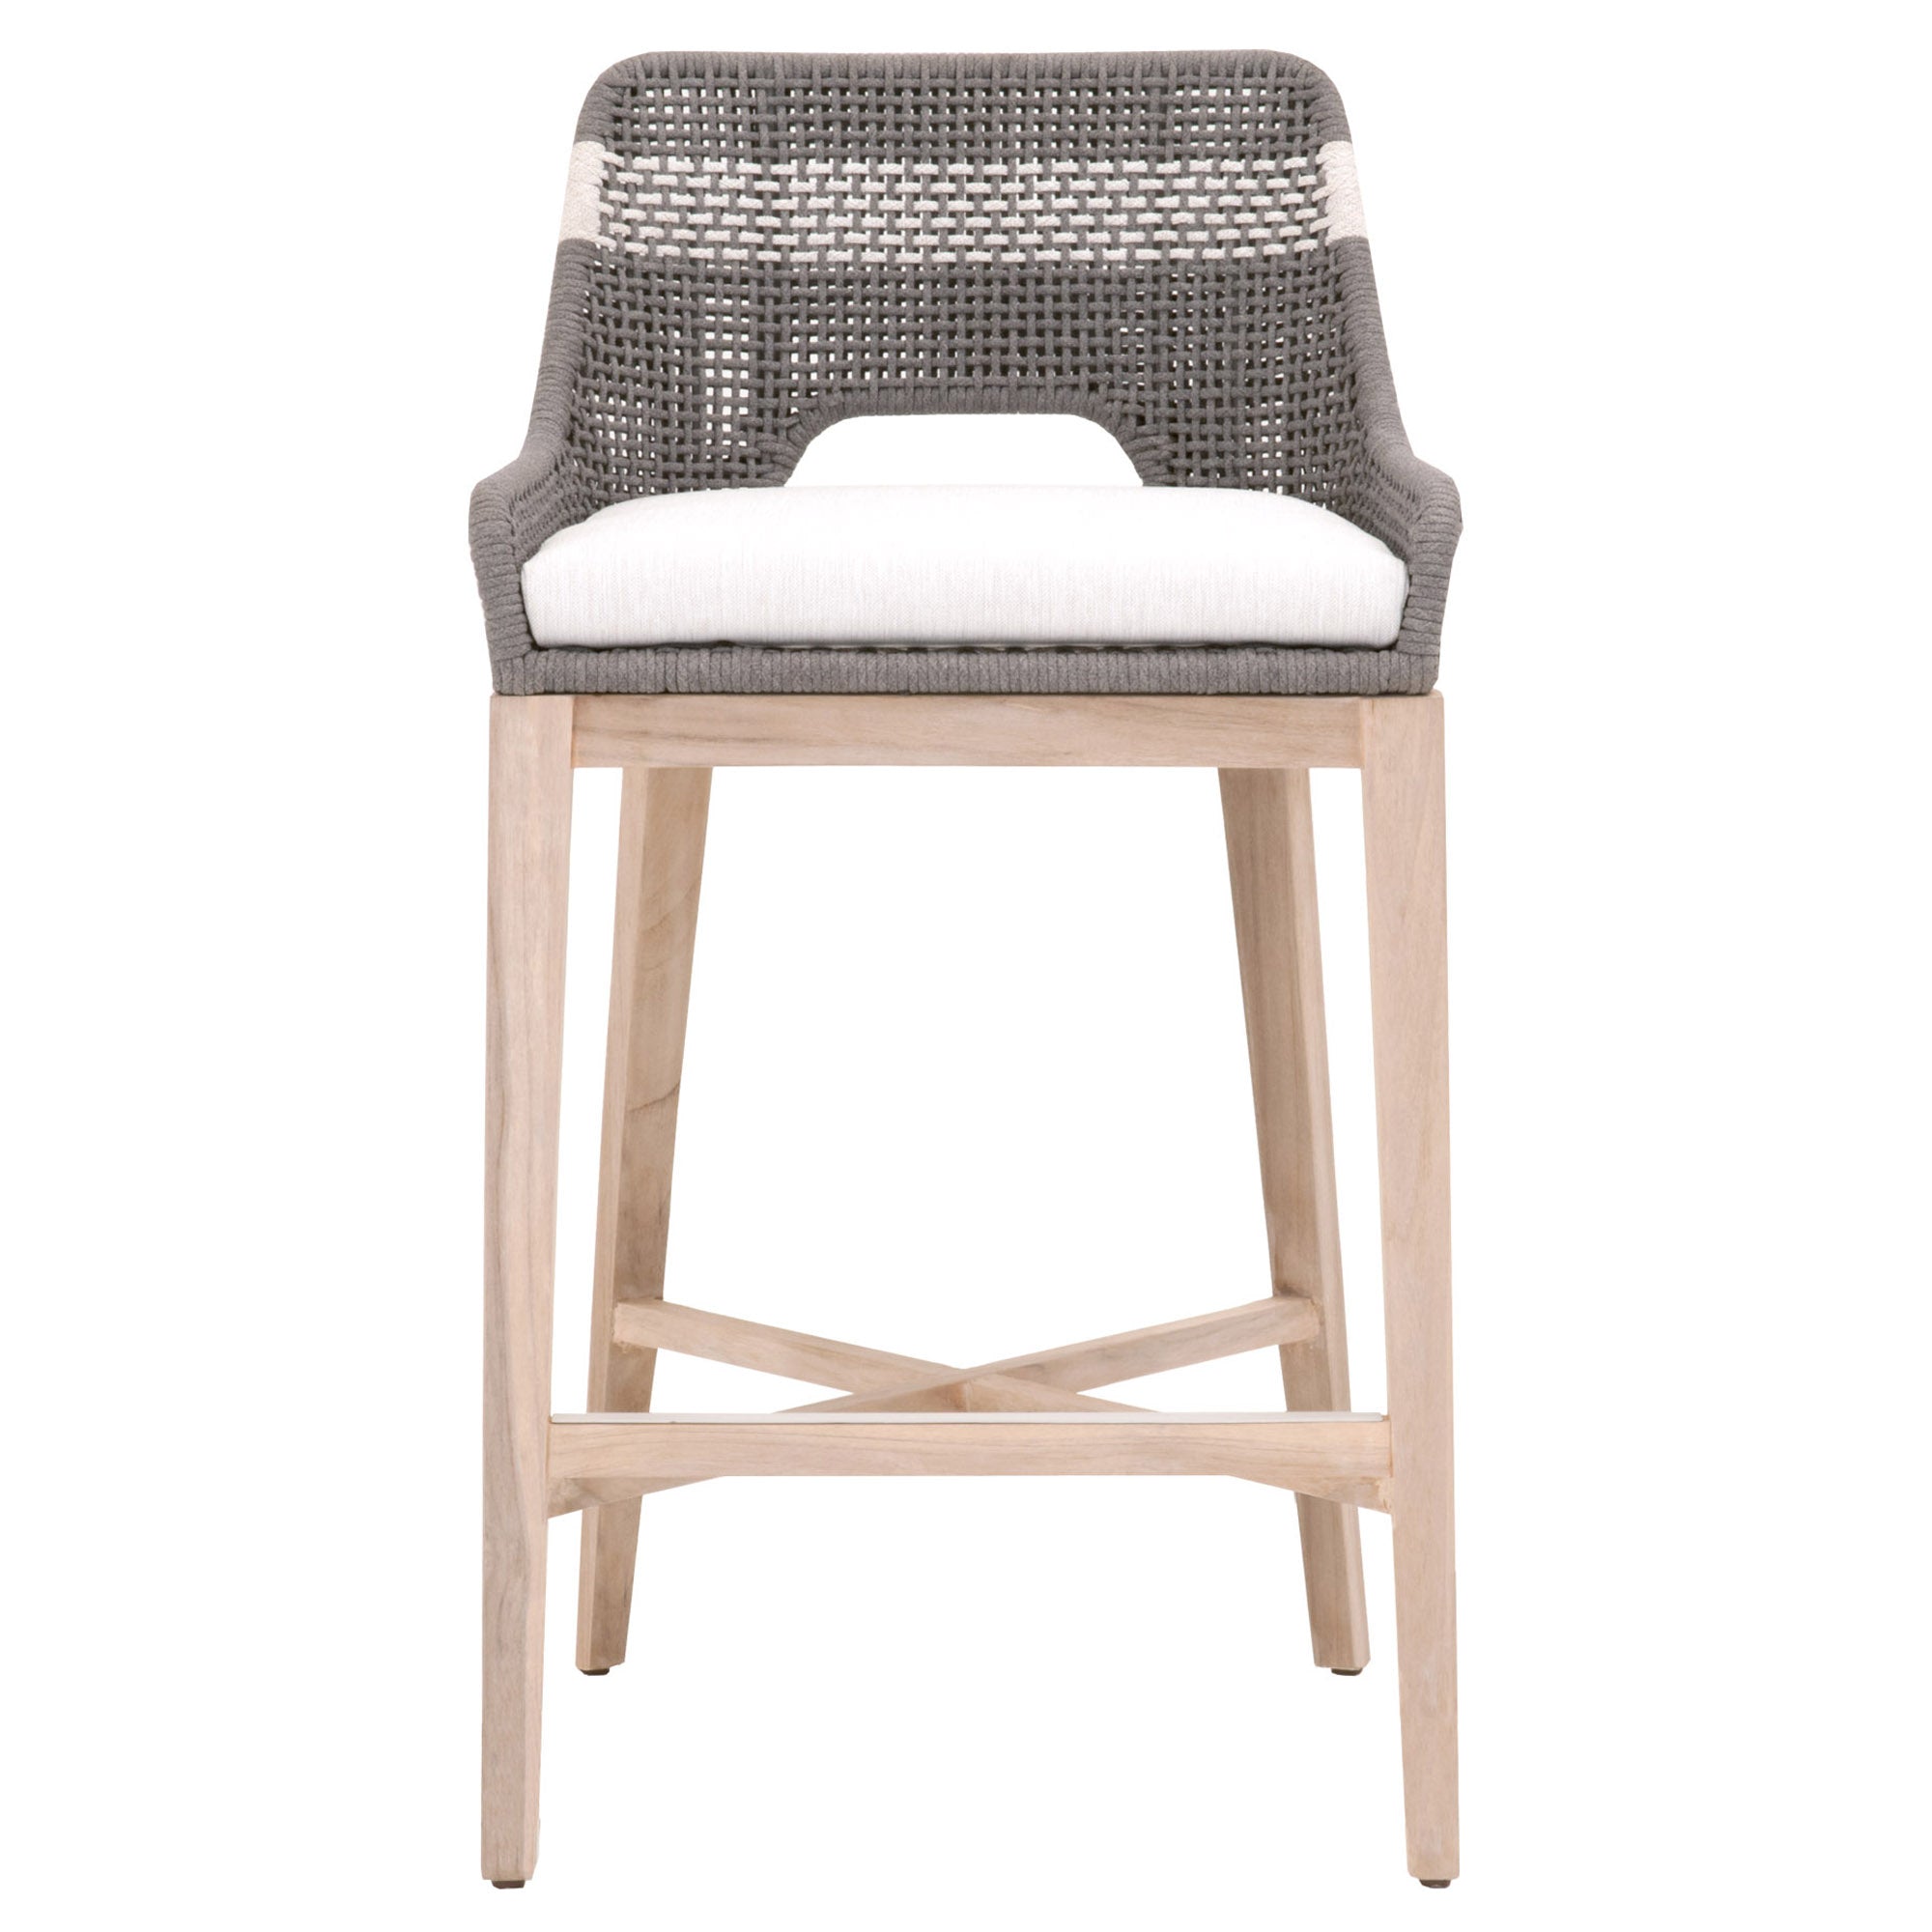 Essentials for Living-Tapestry Outdoor Barstool-Outdoor Barstools-MODTEMPO